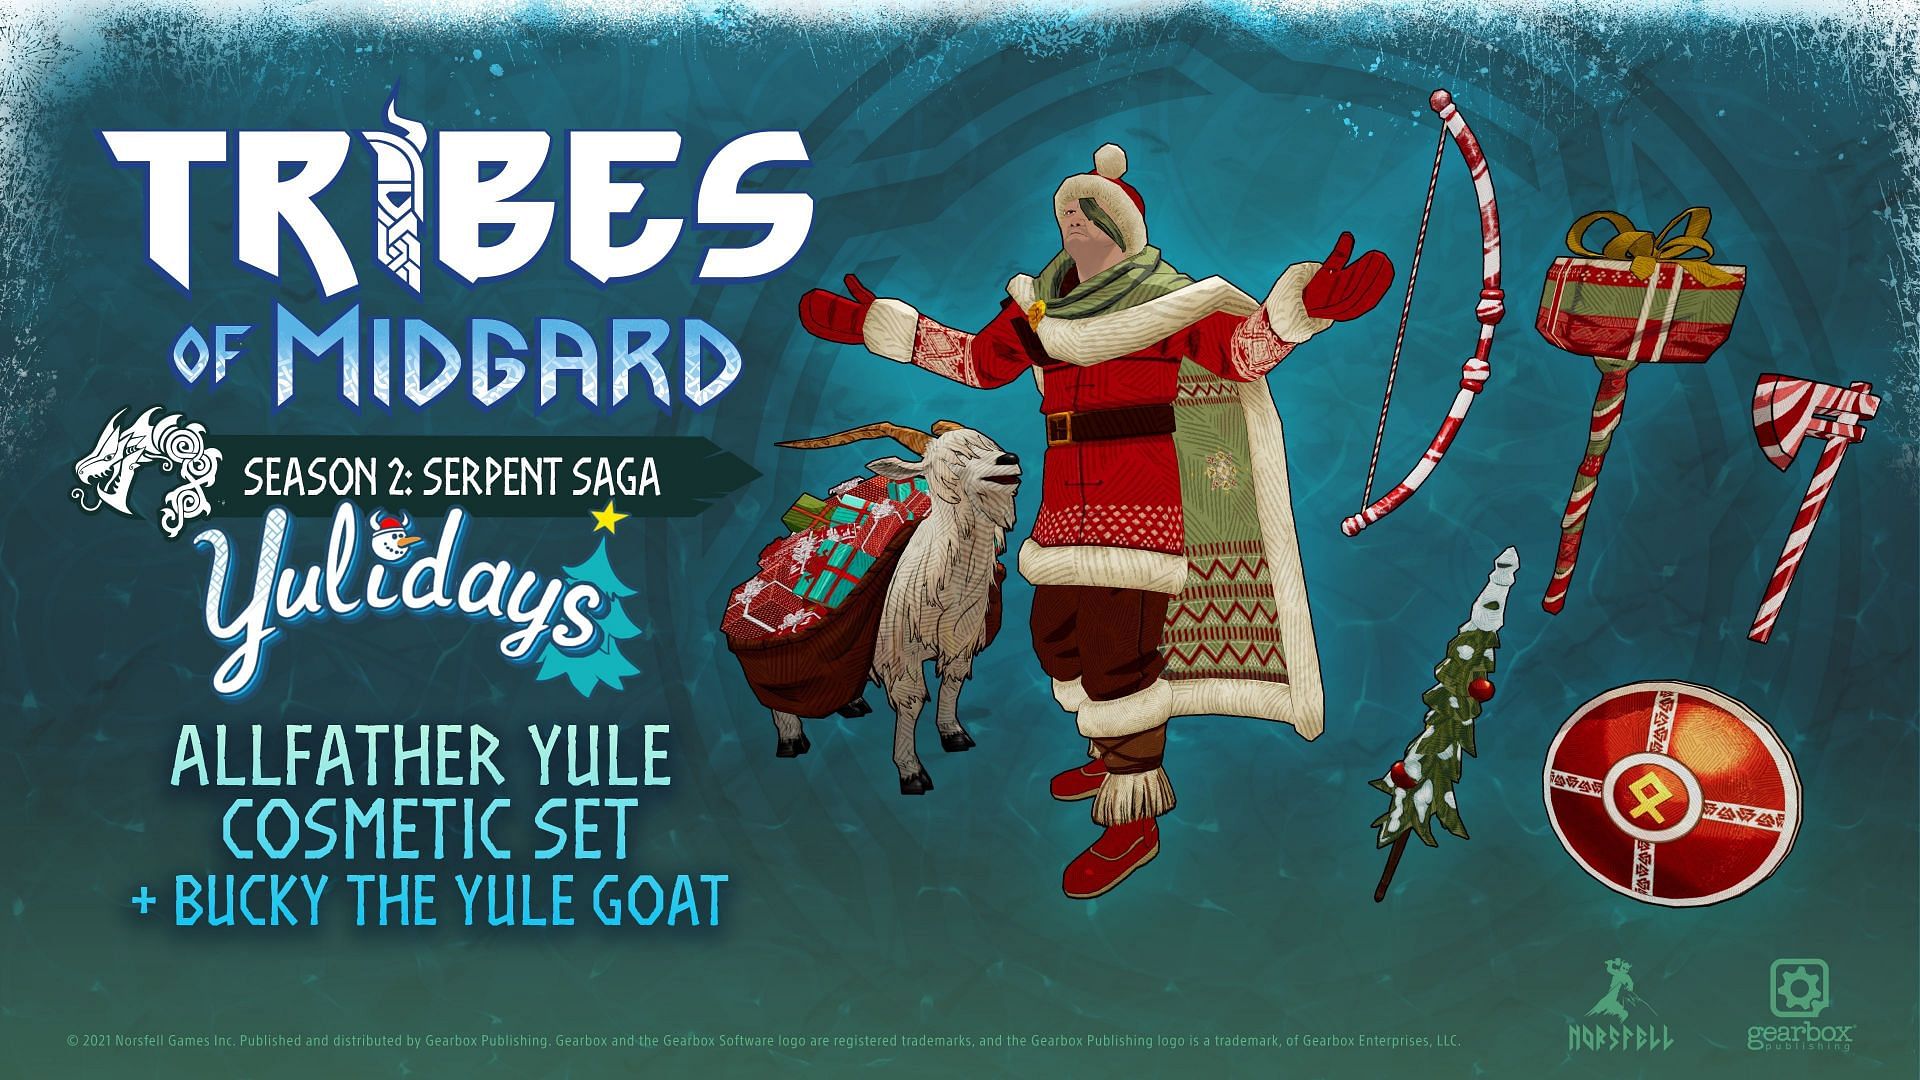 New content with the Yulidays event in Tribes of Midgard (Image via Norsfell Games)